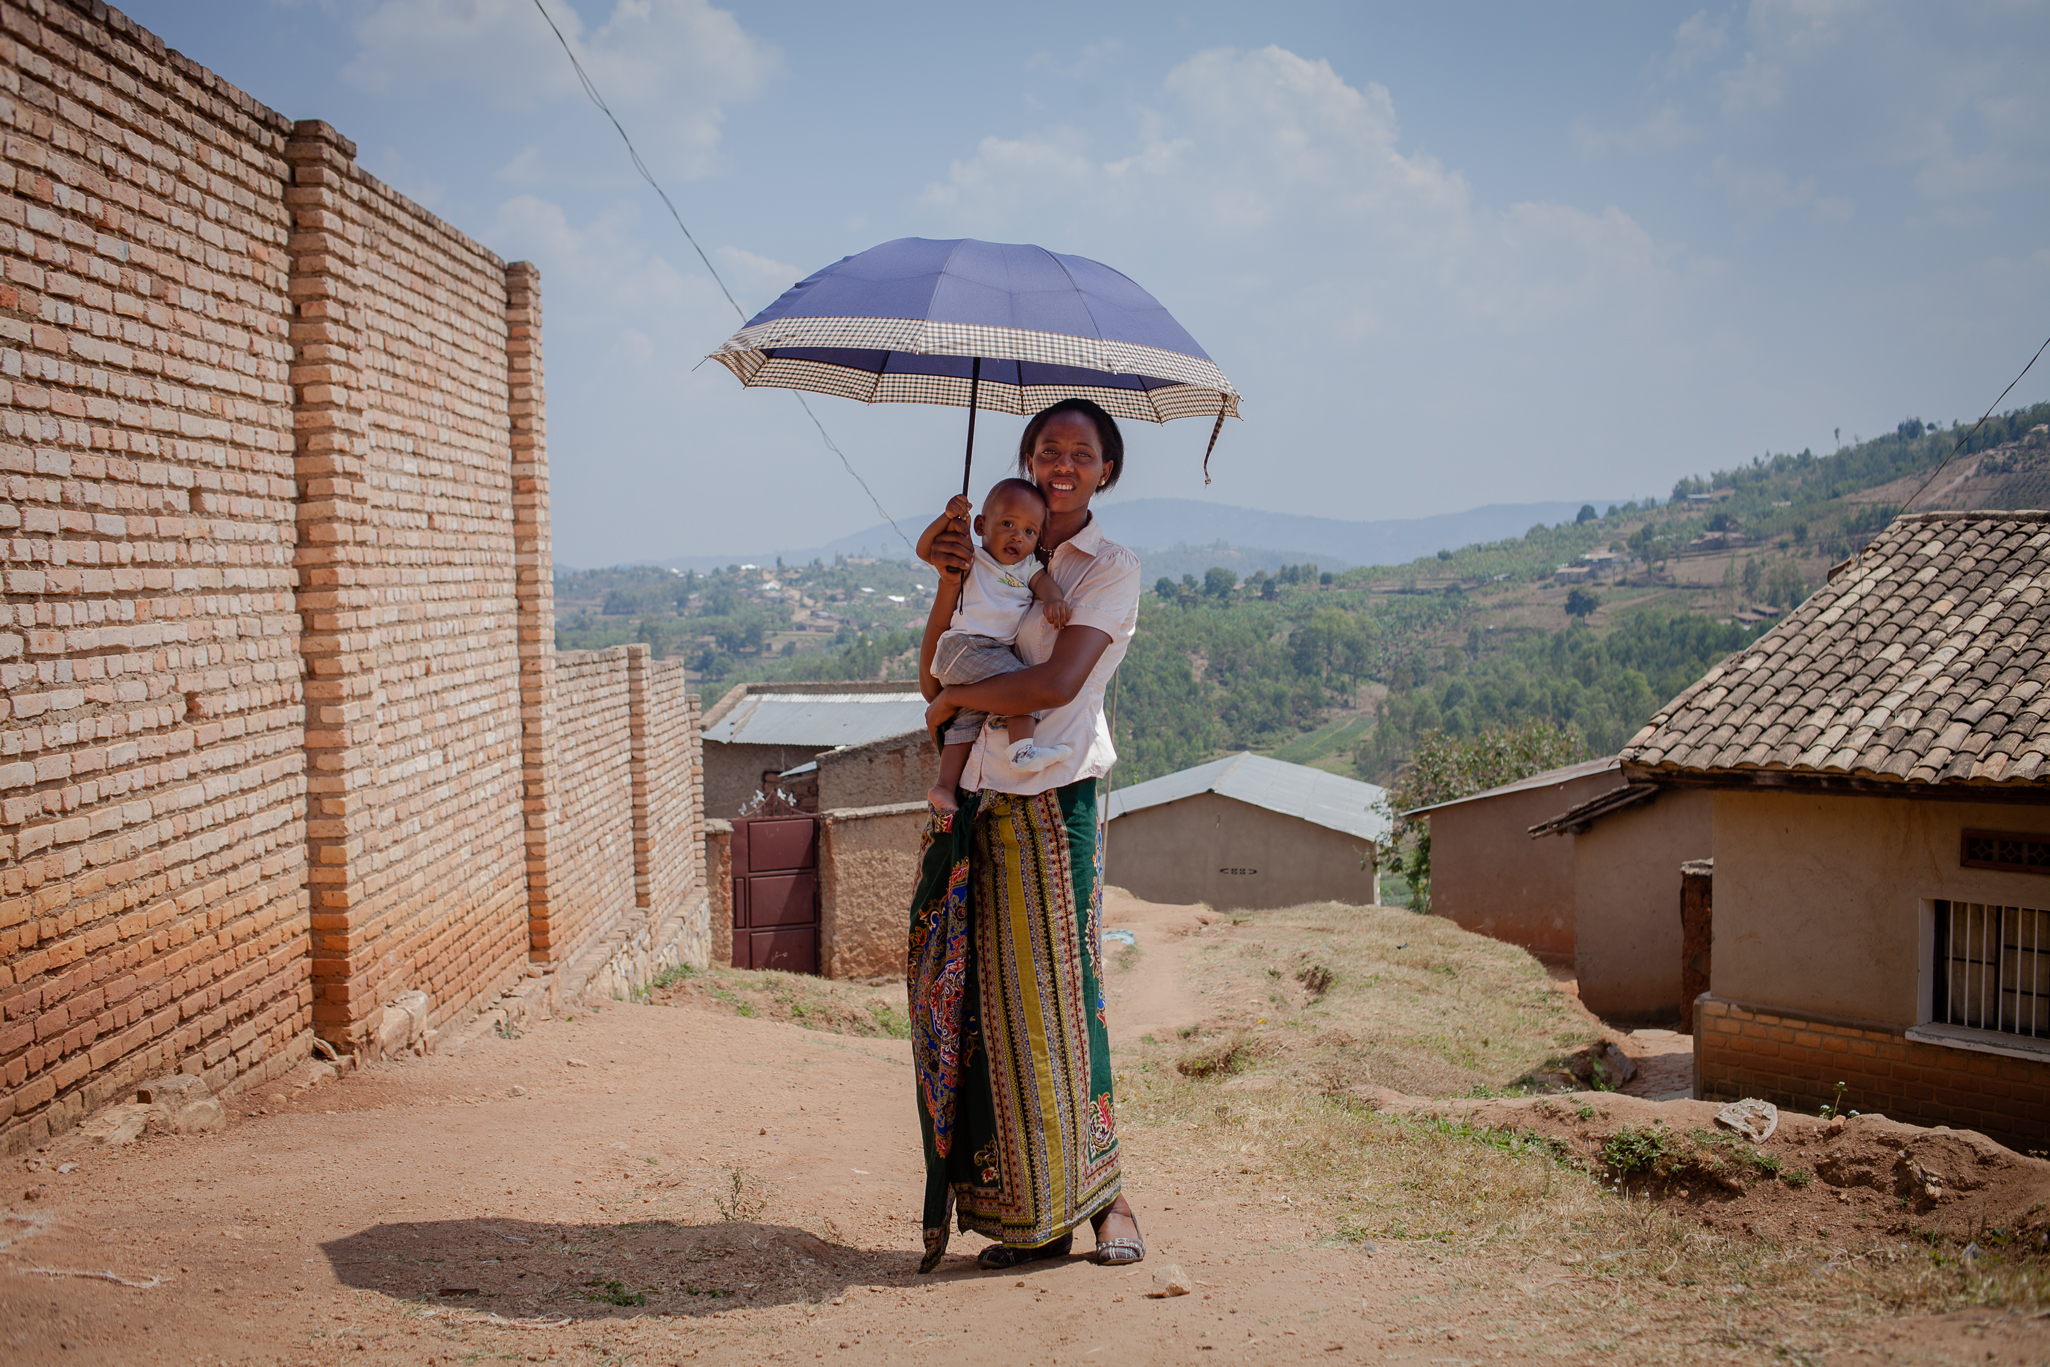 A portrait of Franciose Mukeshimana with her eight month old baby Bertrand in front of their home in Muhanga on July 21, 2017. She was the first mother to receive blood from Zipline at Kabgayi Hospital in Muhanga district. (Esther Mbabazi for TIME)